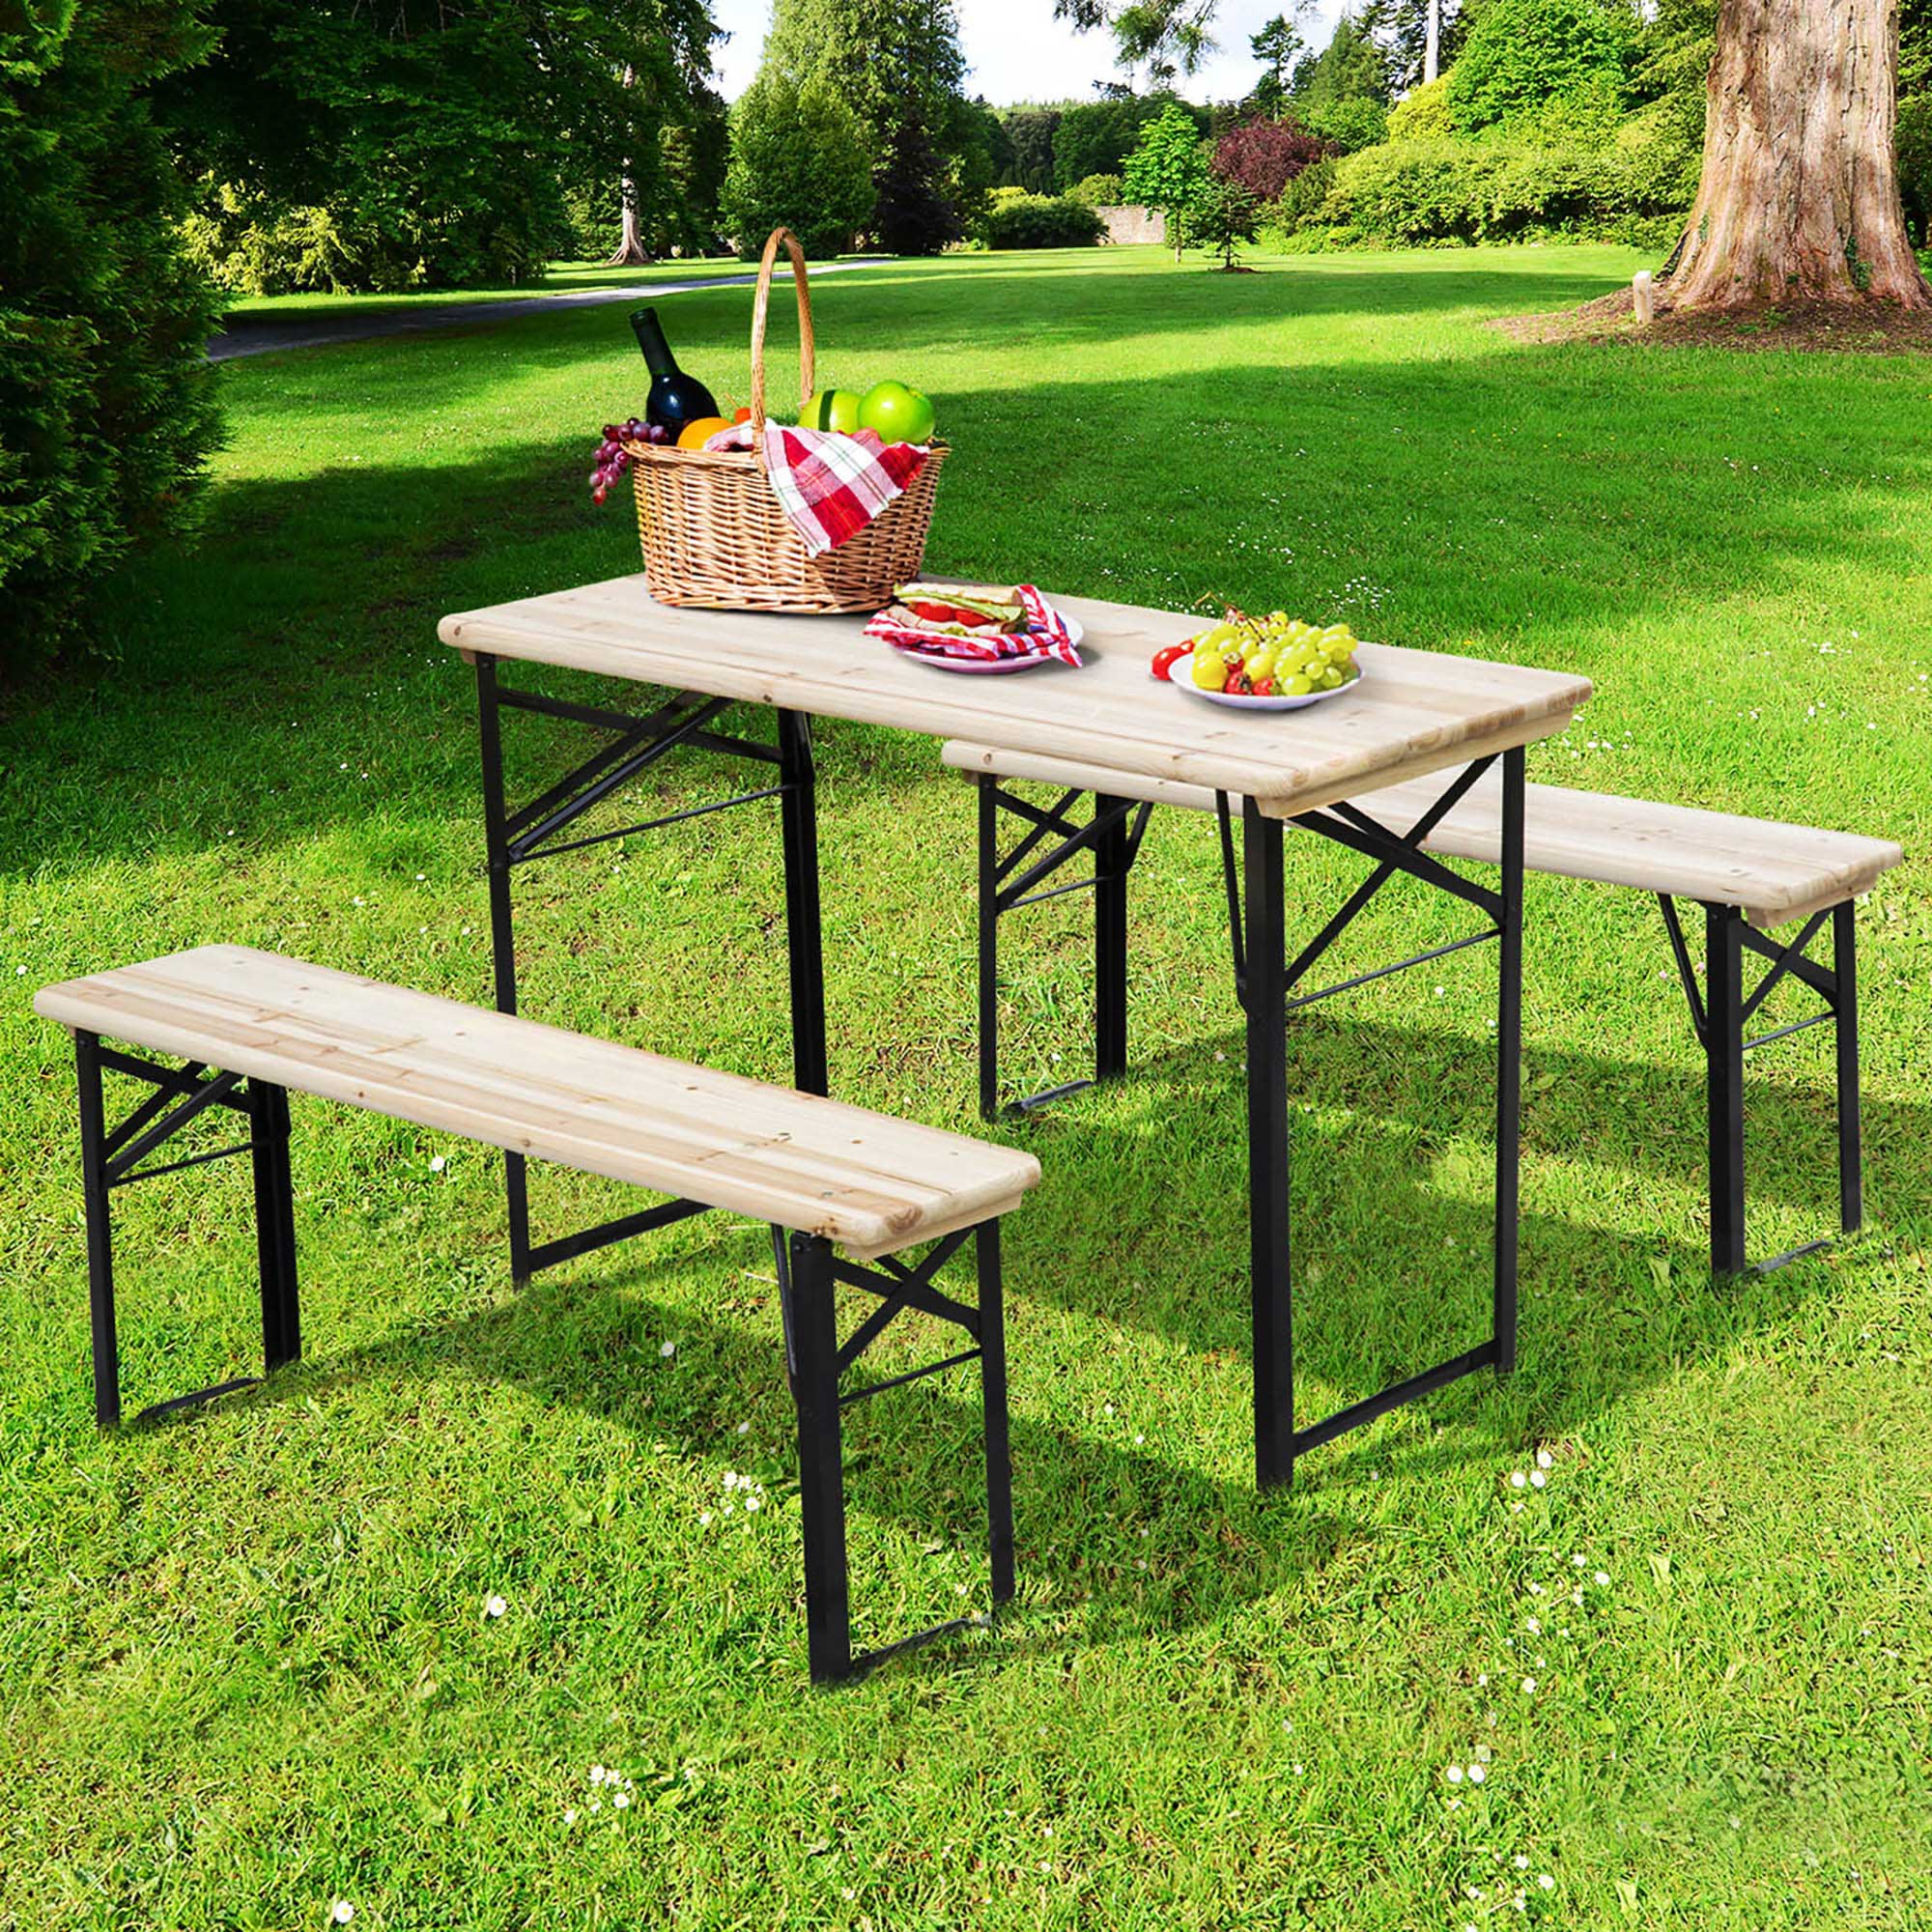 Outsunny Picnic Wooden Table and Bench Set